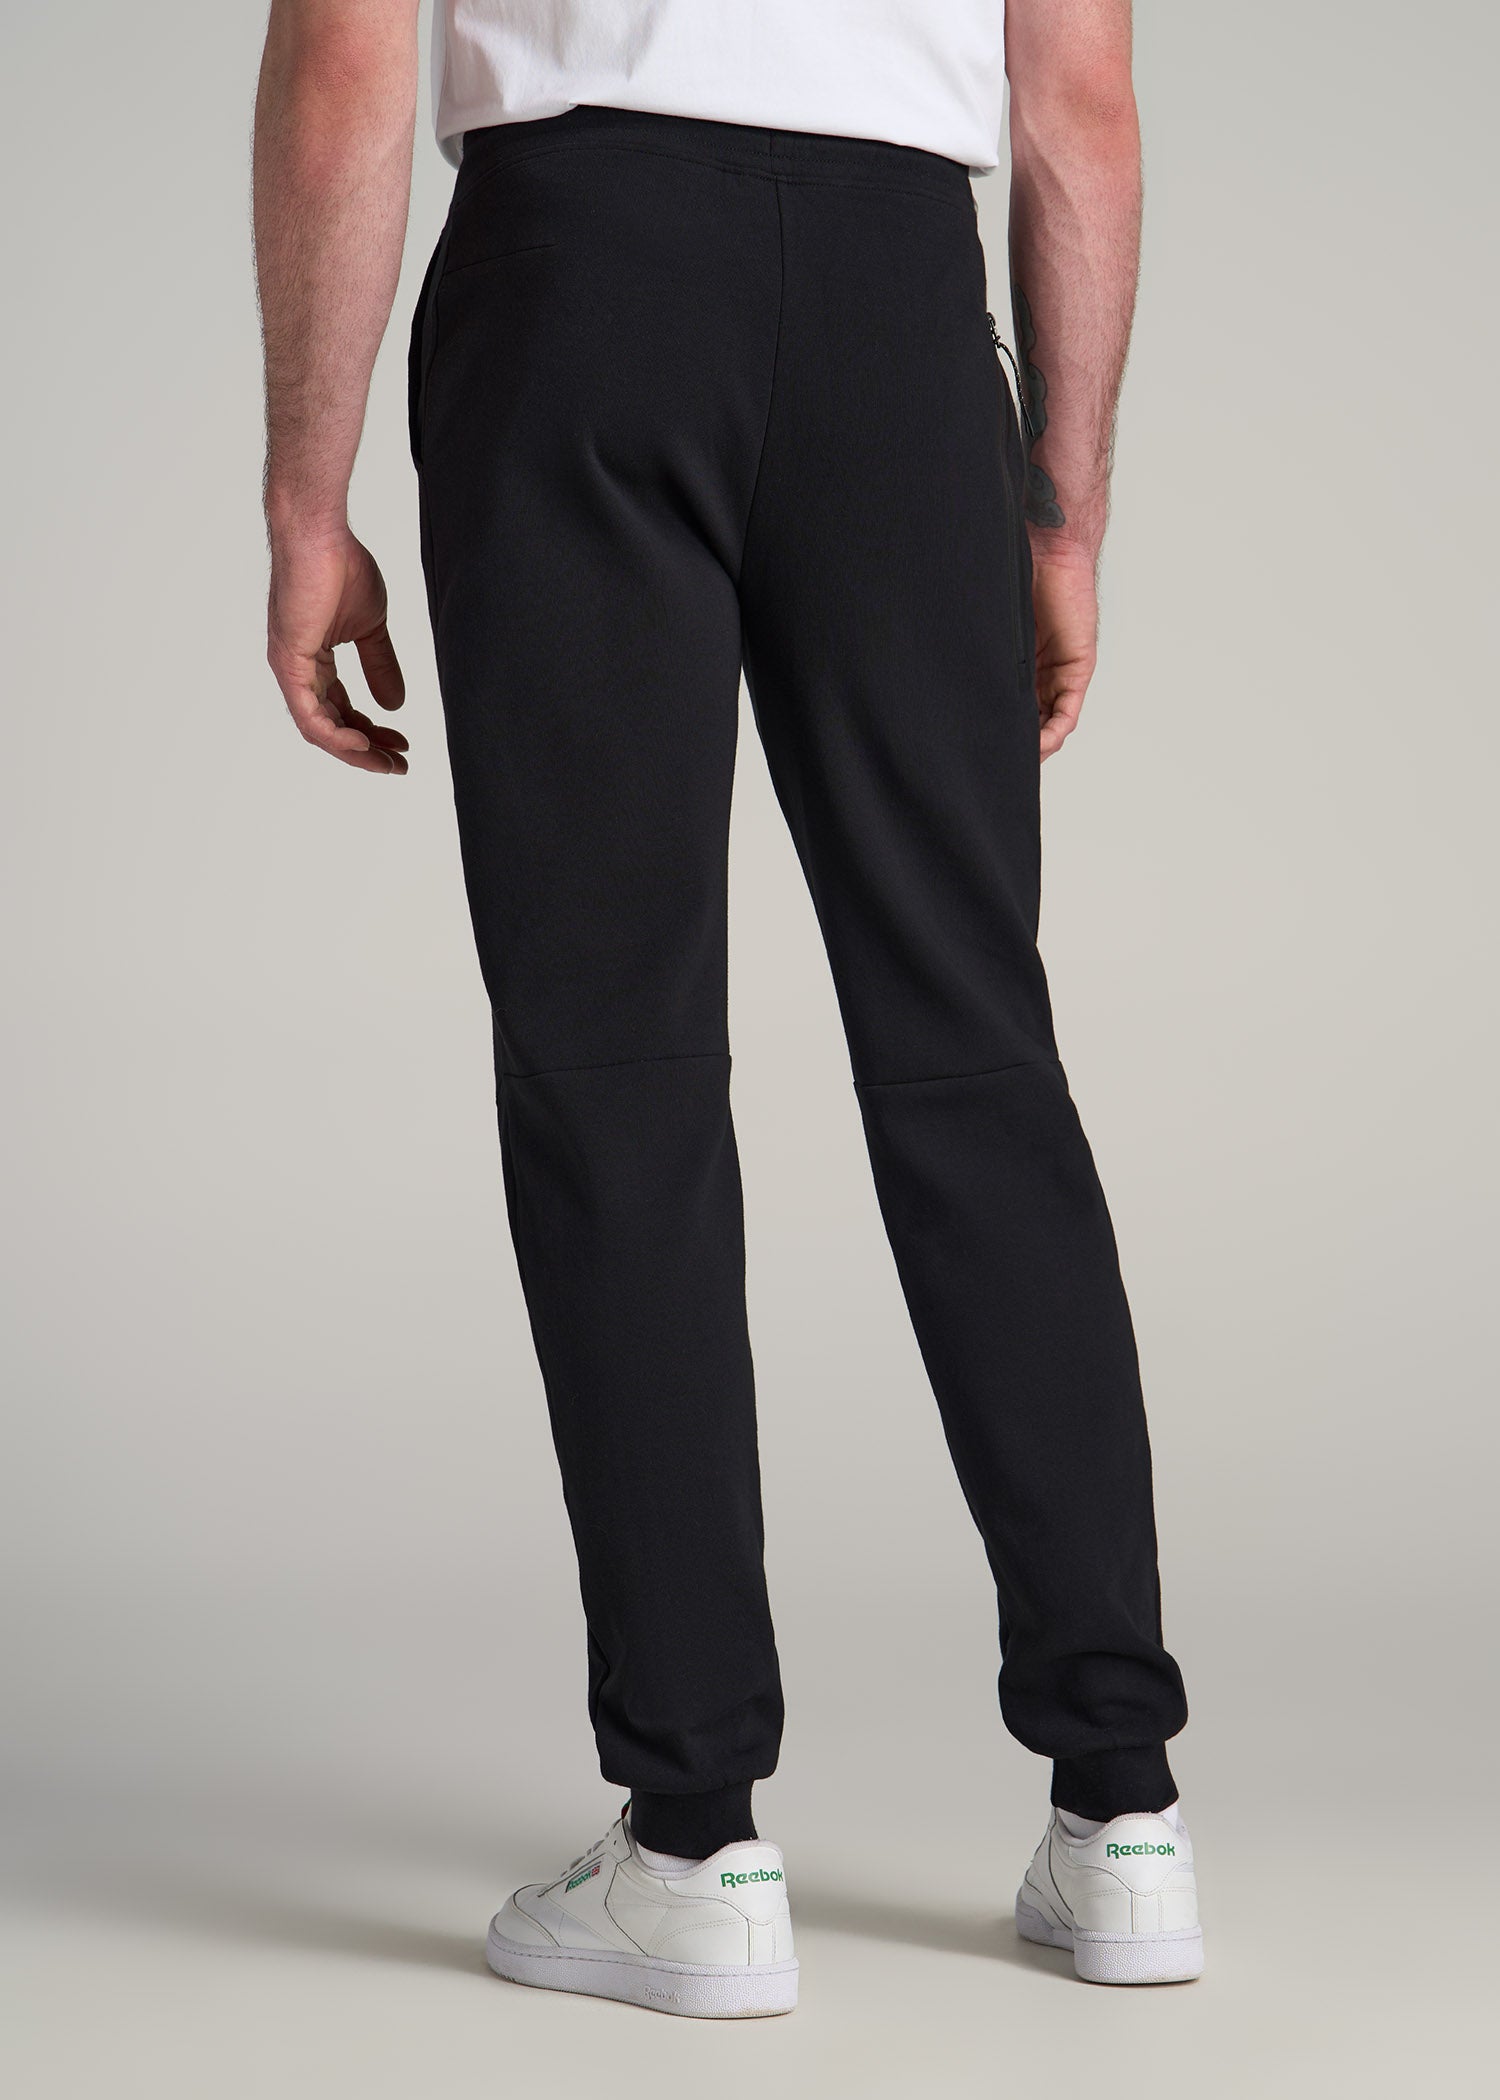 Utility Joggers for Tall Men | American Tall